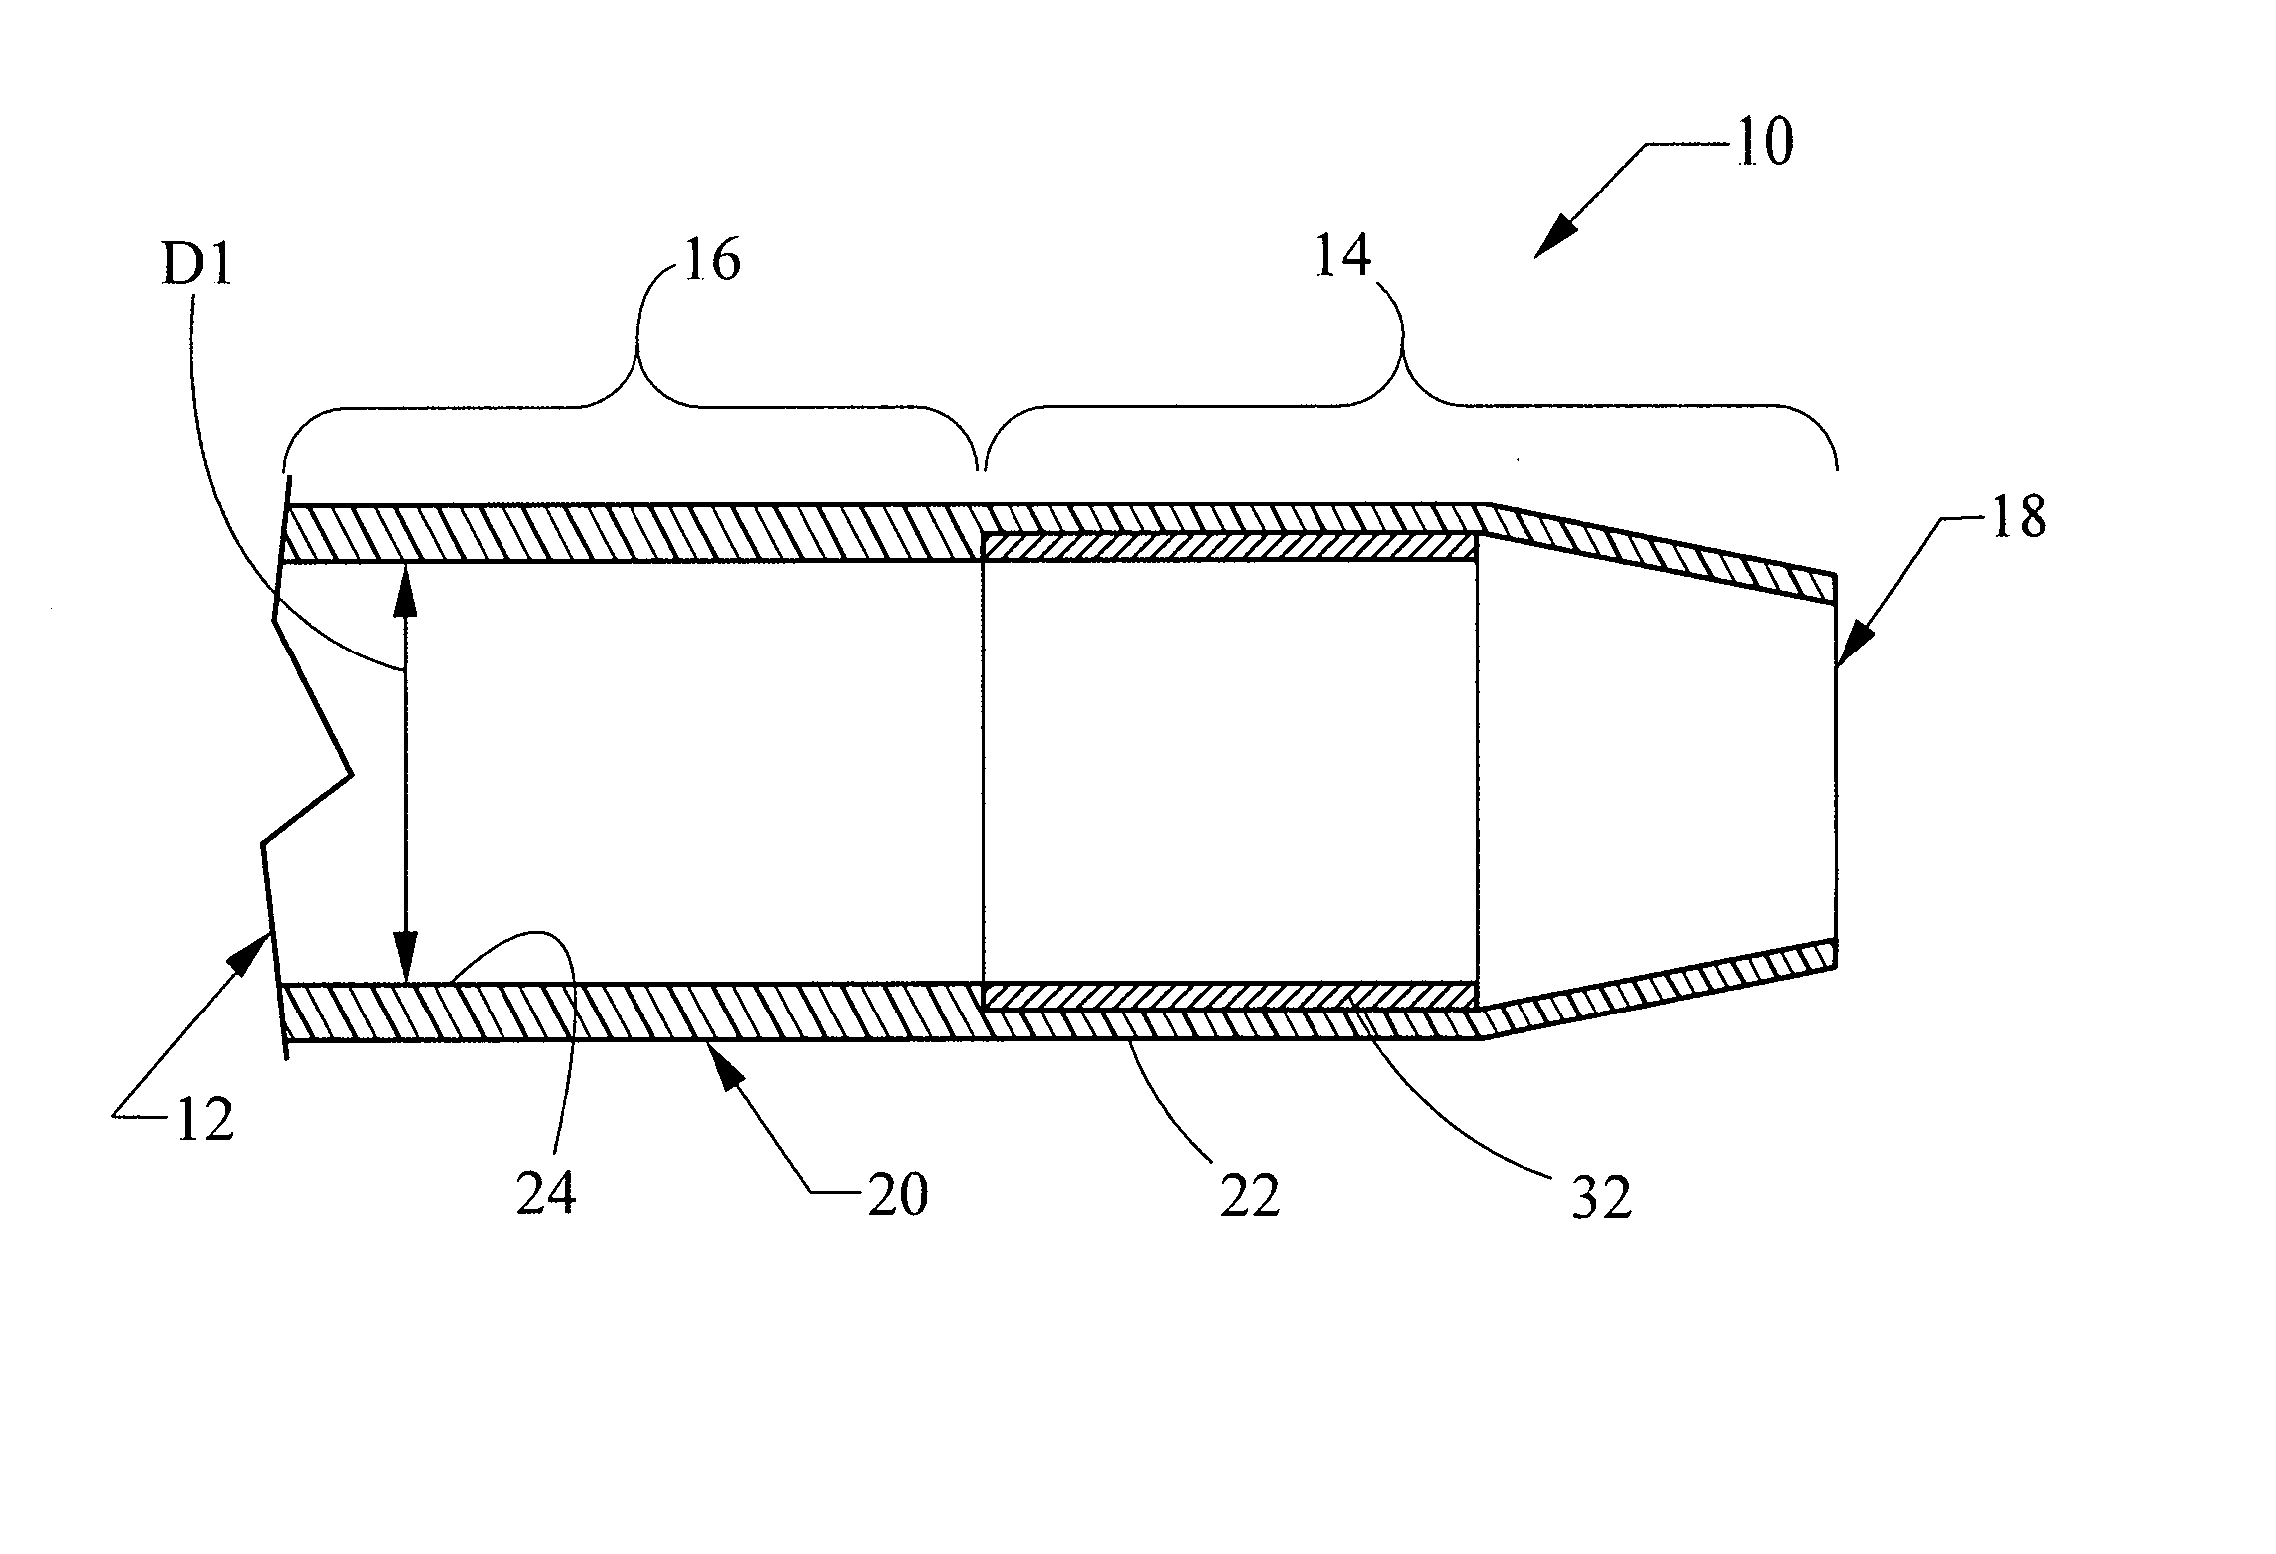 Endovascular device tip assembly incorporating a marker device and method for making the same